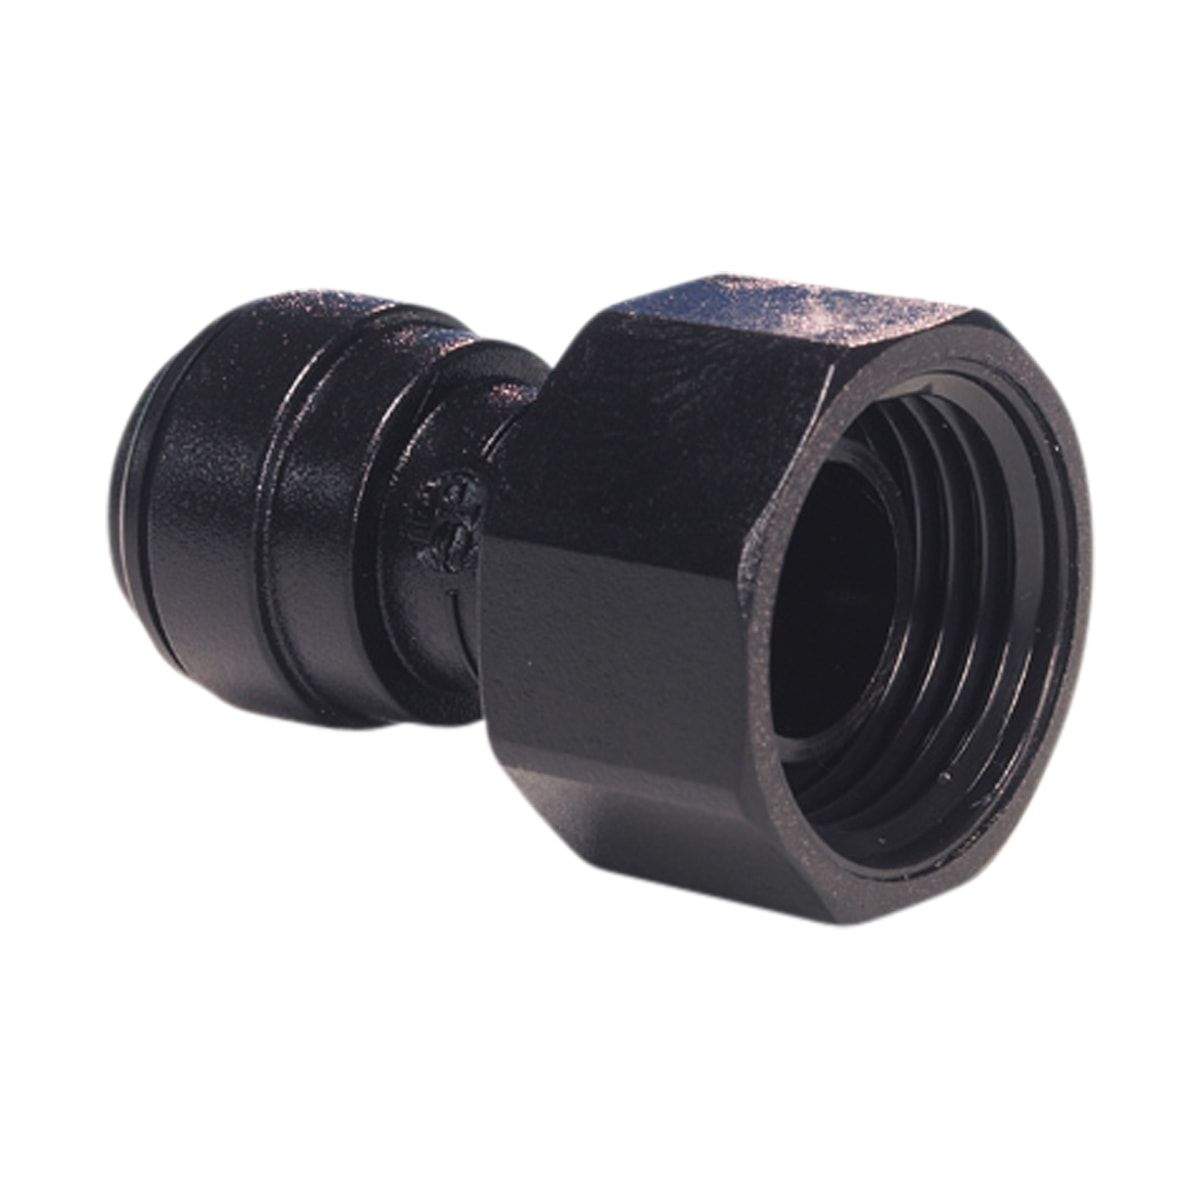 Female coupling 20 x 27 ( 3/4 ), for 6 mm hose